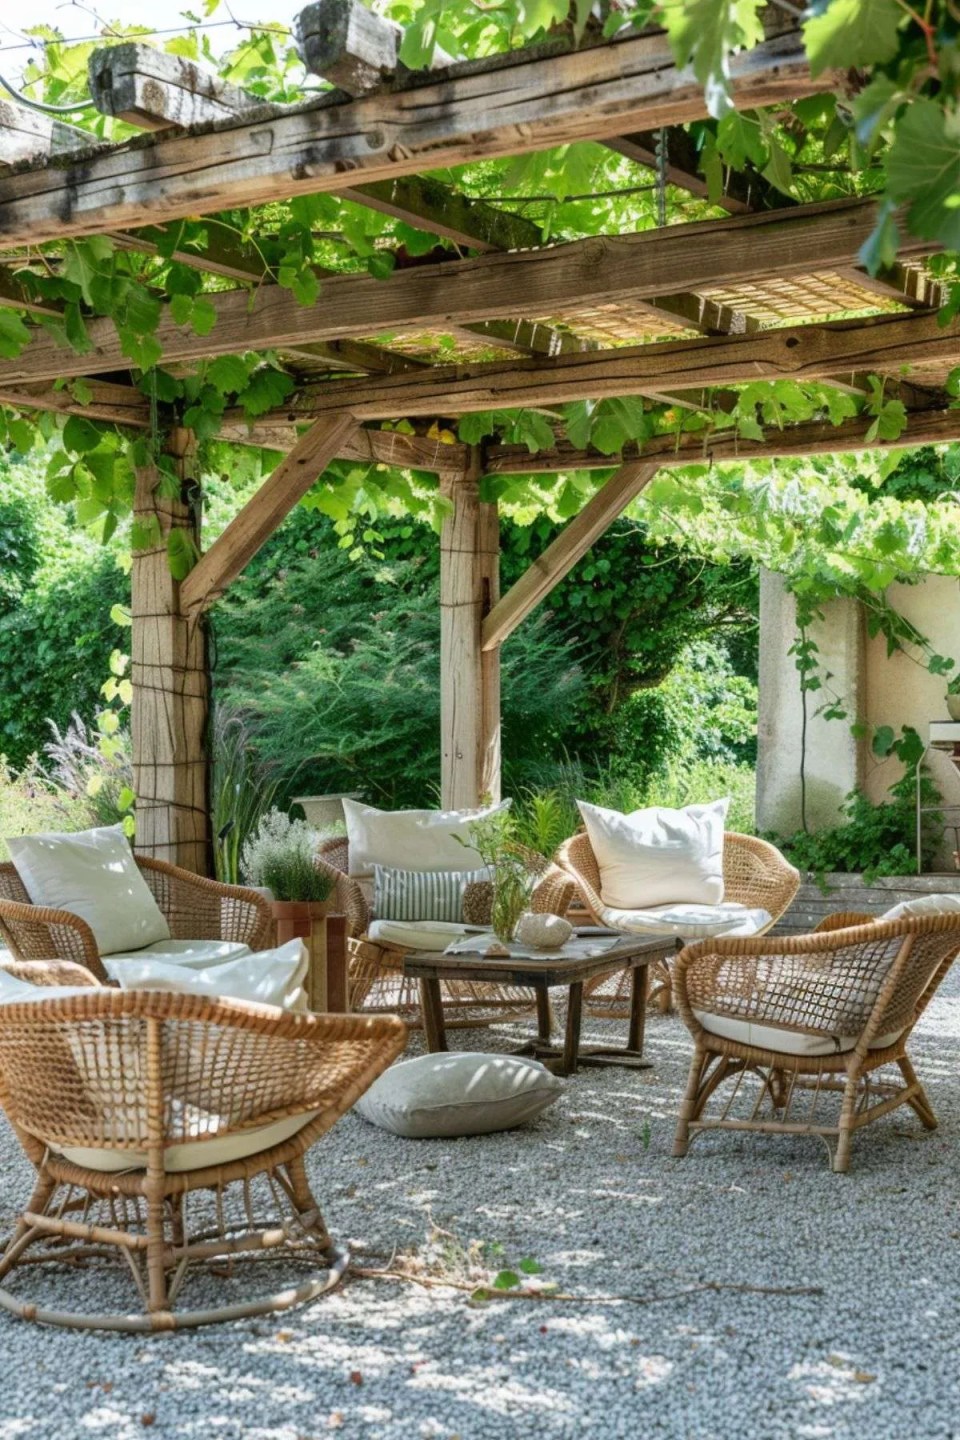 a patio area with rattan chairs and a pergola with grapevine growing on it